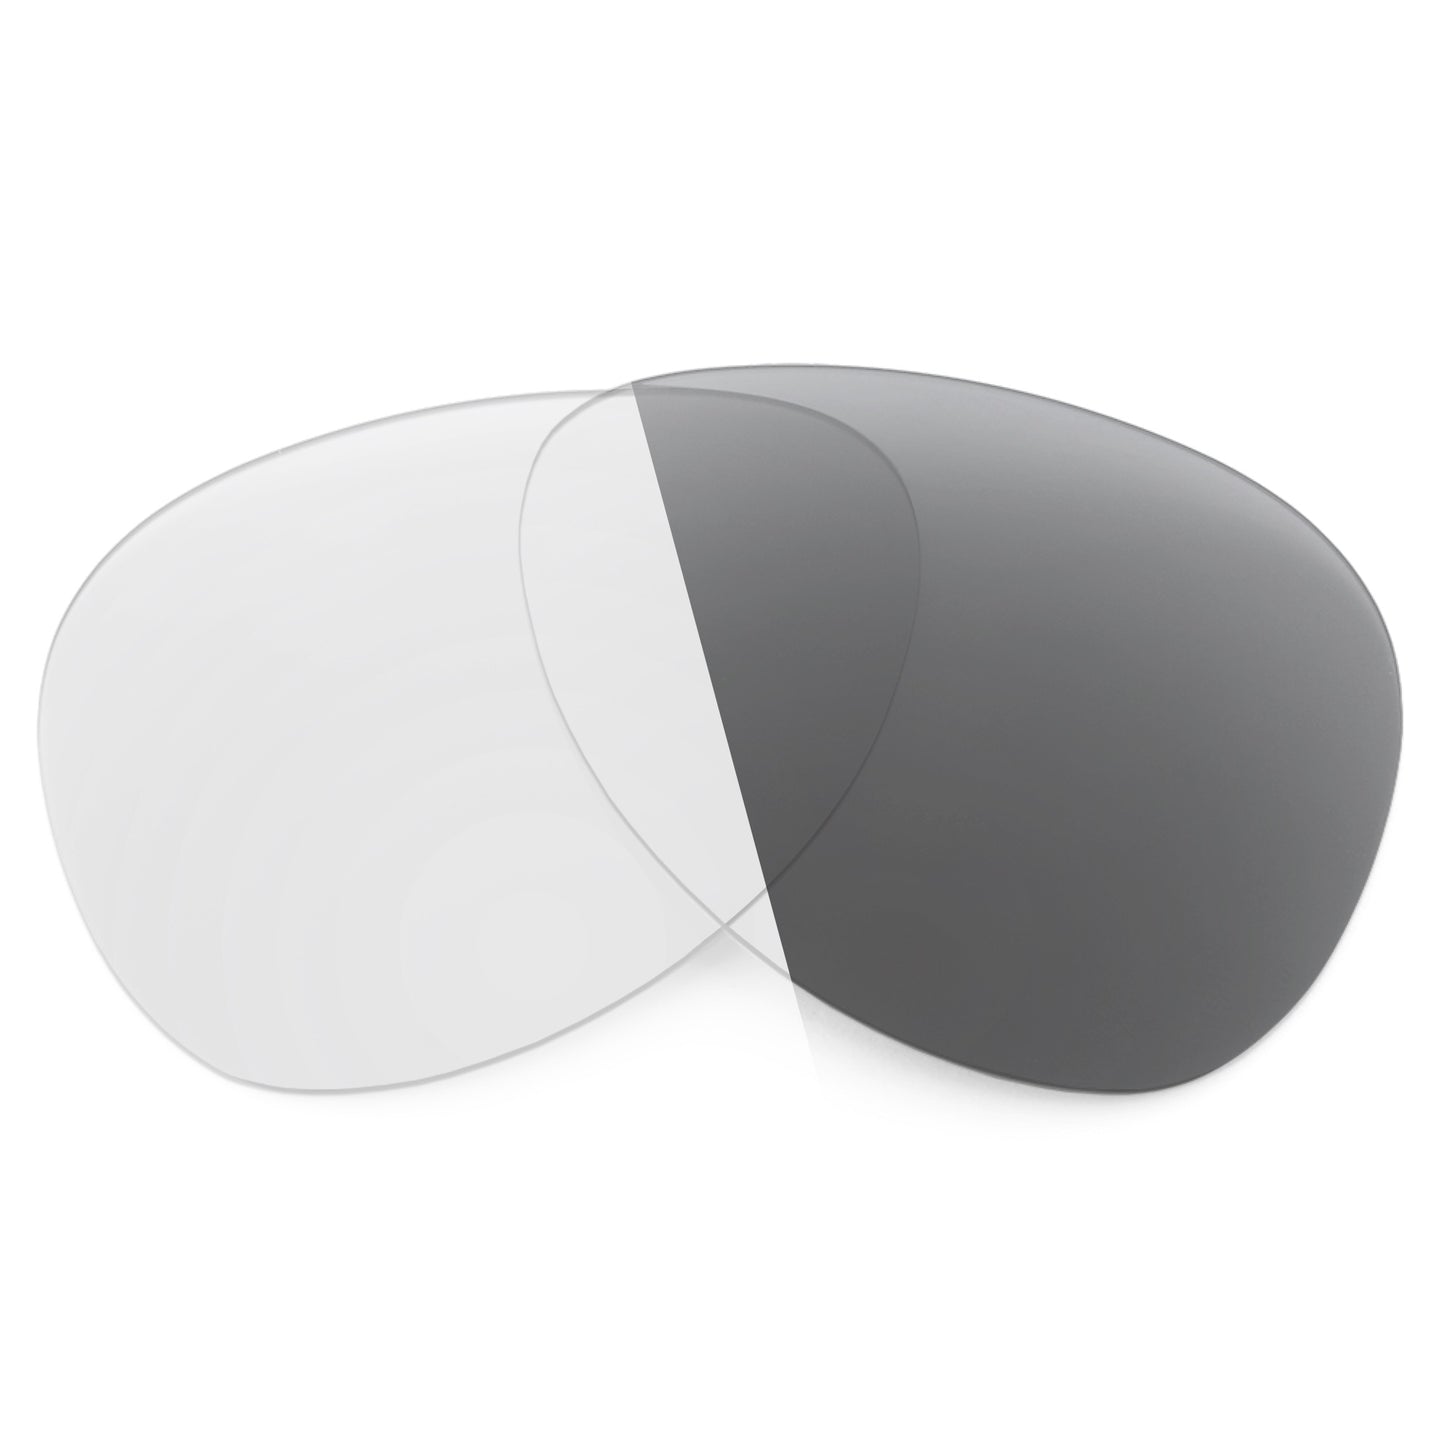 Revant replacement lenses for Maui Jim Waterfront MJ830 Non-Polarized Adapt Gray Photochromic